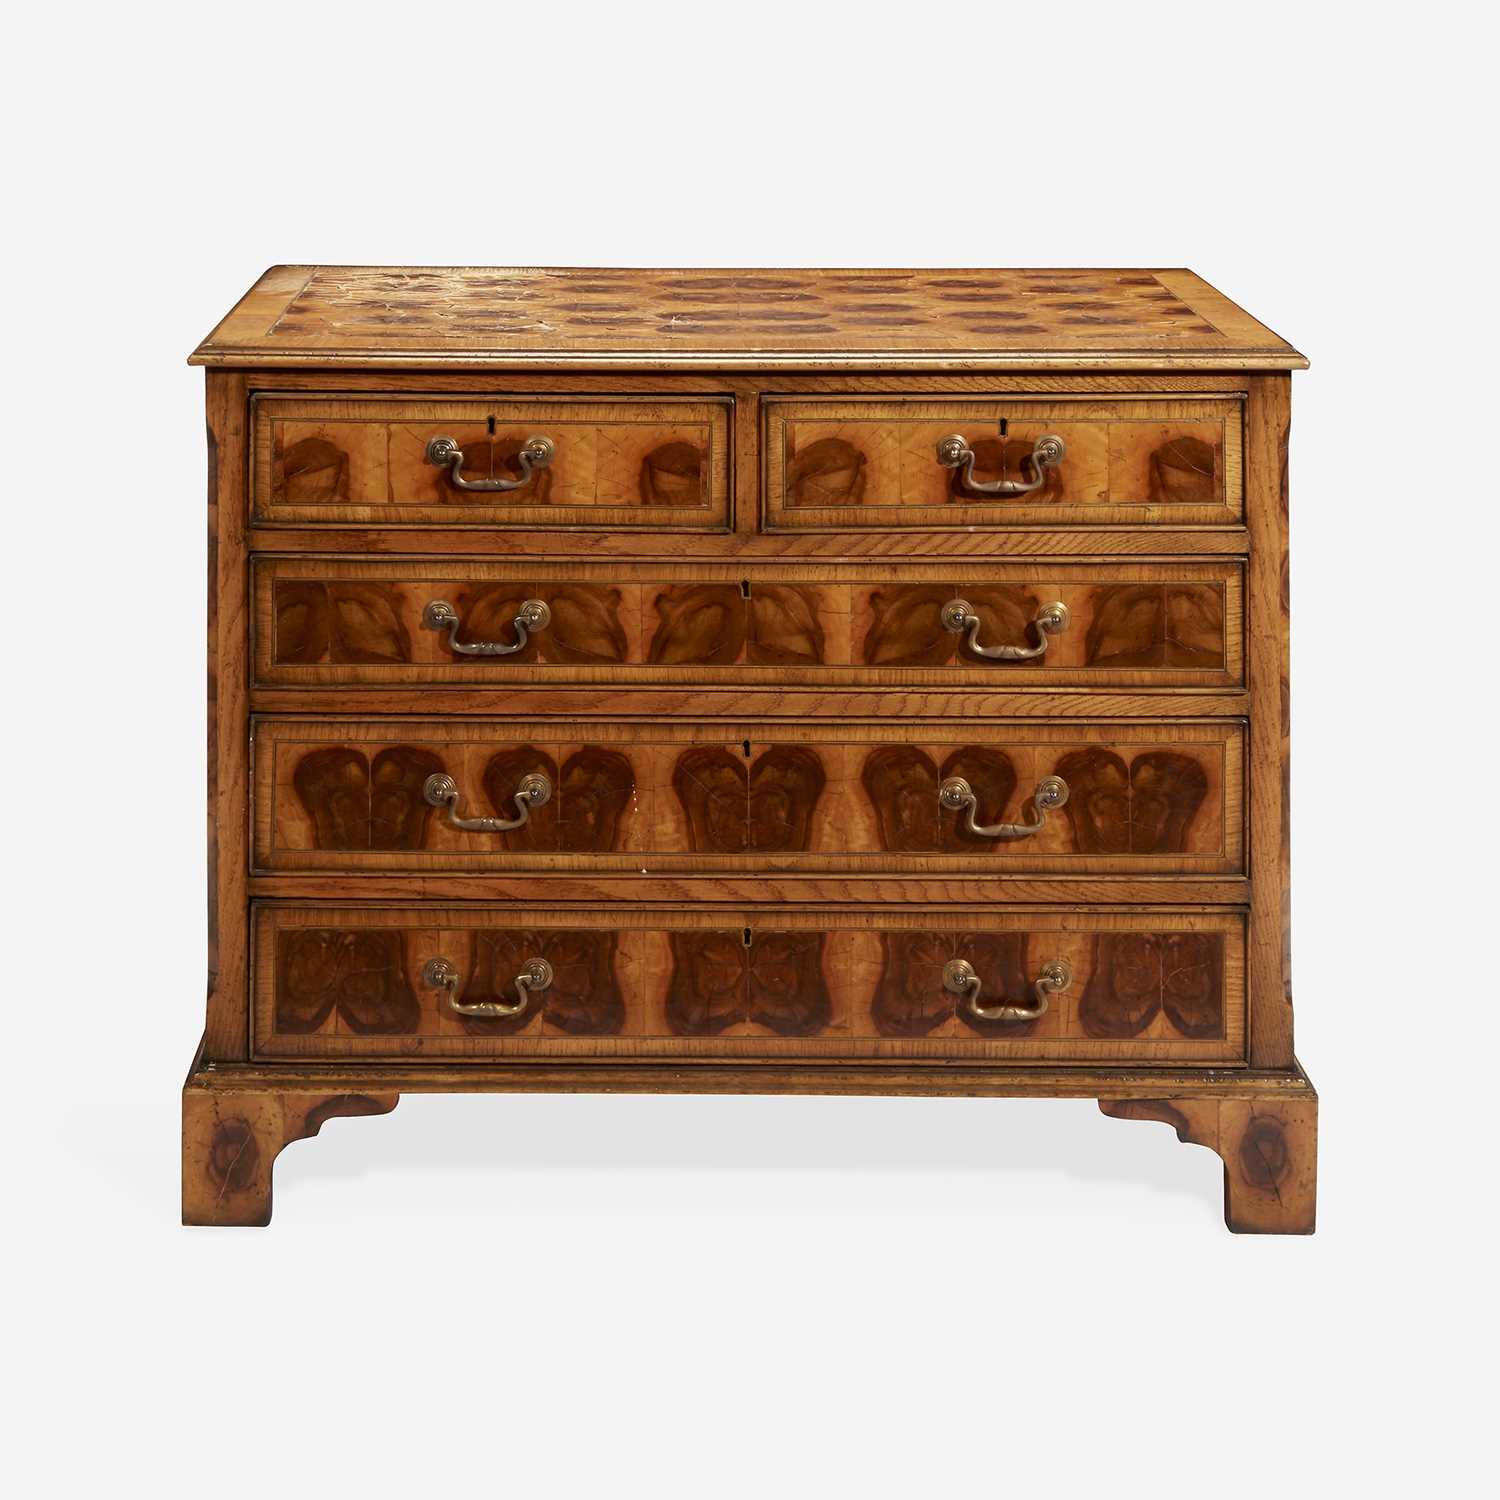 Lot 112 - A George I Style Oak and Oyster Veneer Chest of Drawers